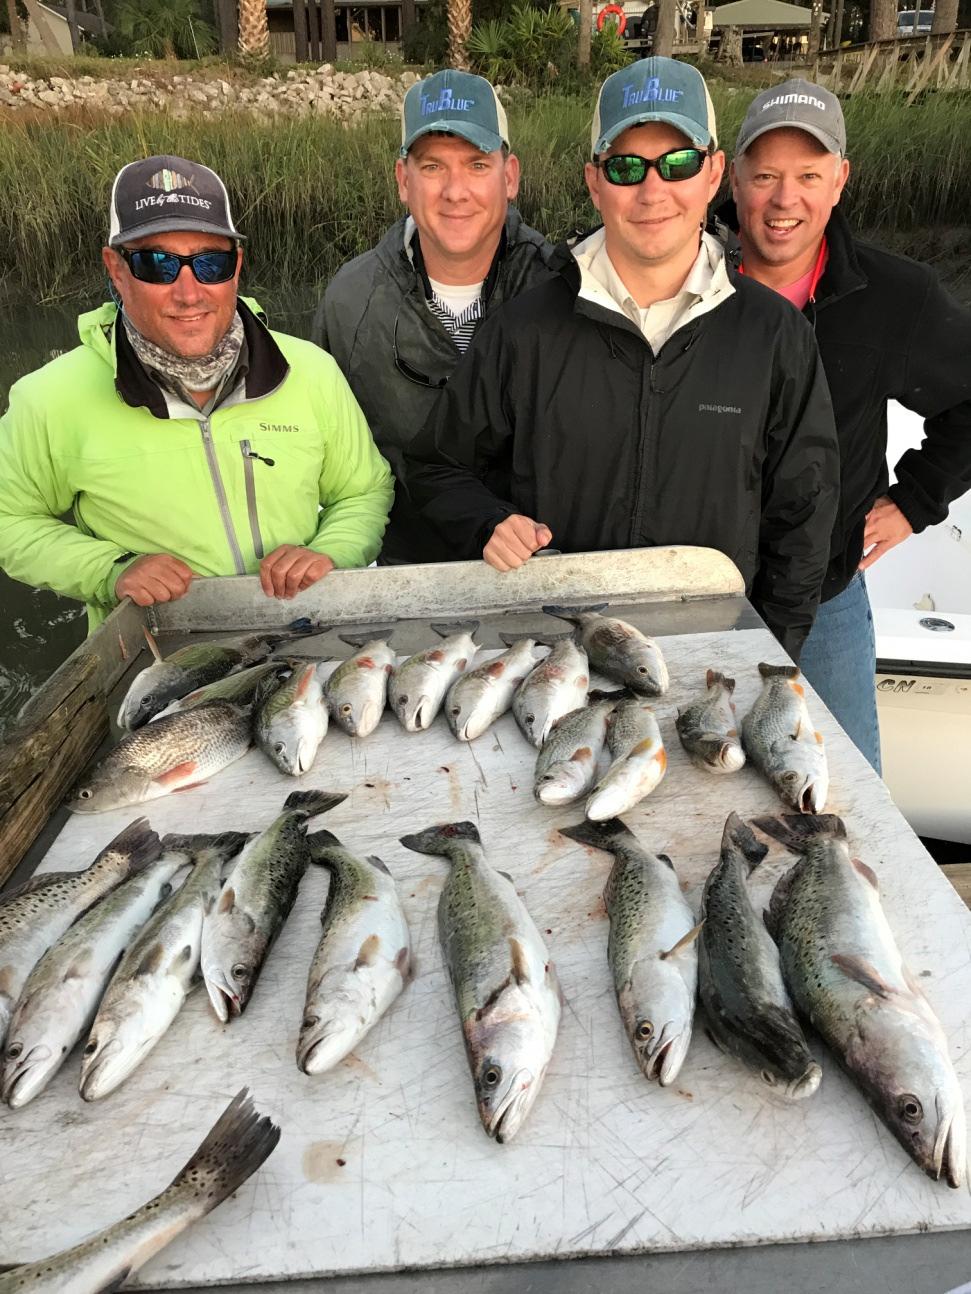 Captain Kevin Rose of Miss Judy Charters took these Birmingham, Alabama fishermen for a spectacular inshore fishing trip.